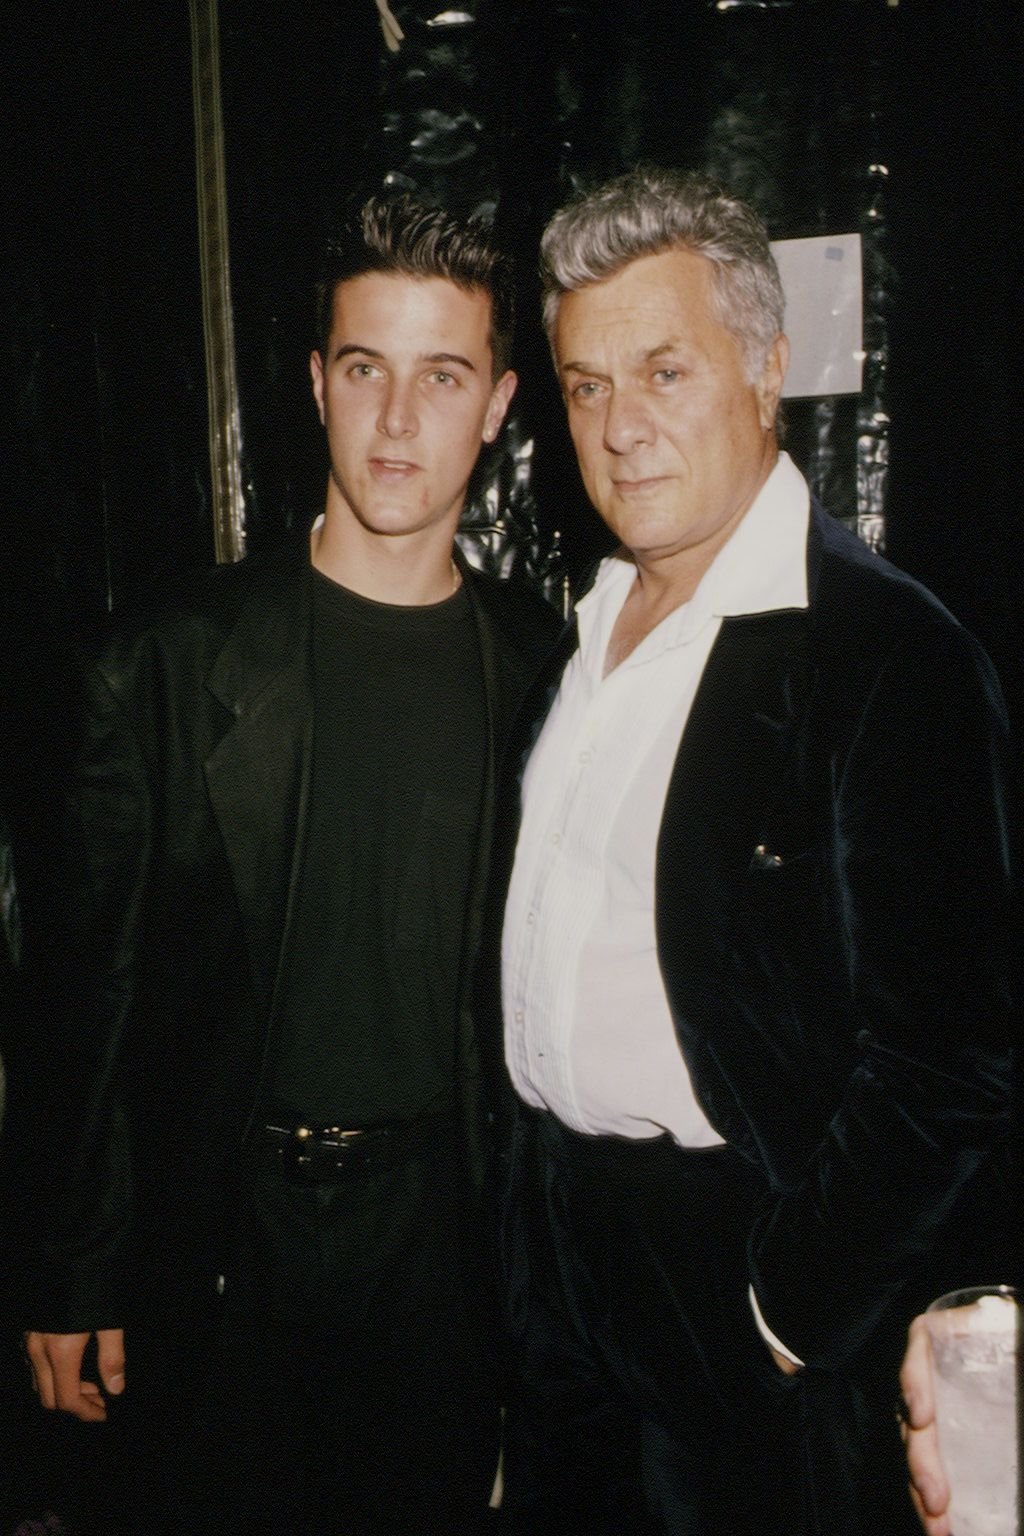 Nicholas Curtis, Son of Tony Curtis Died at the Age of 23 — Inside Who